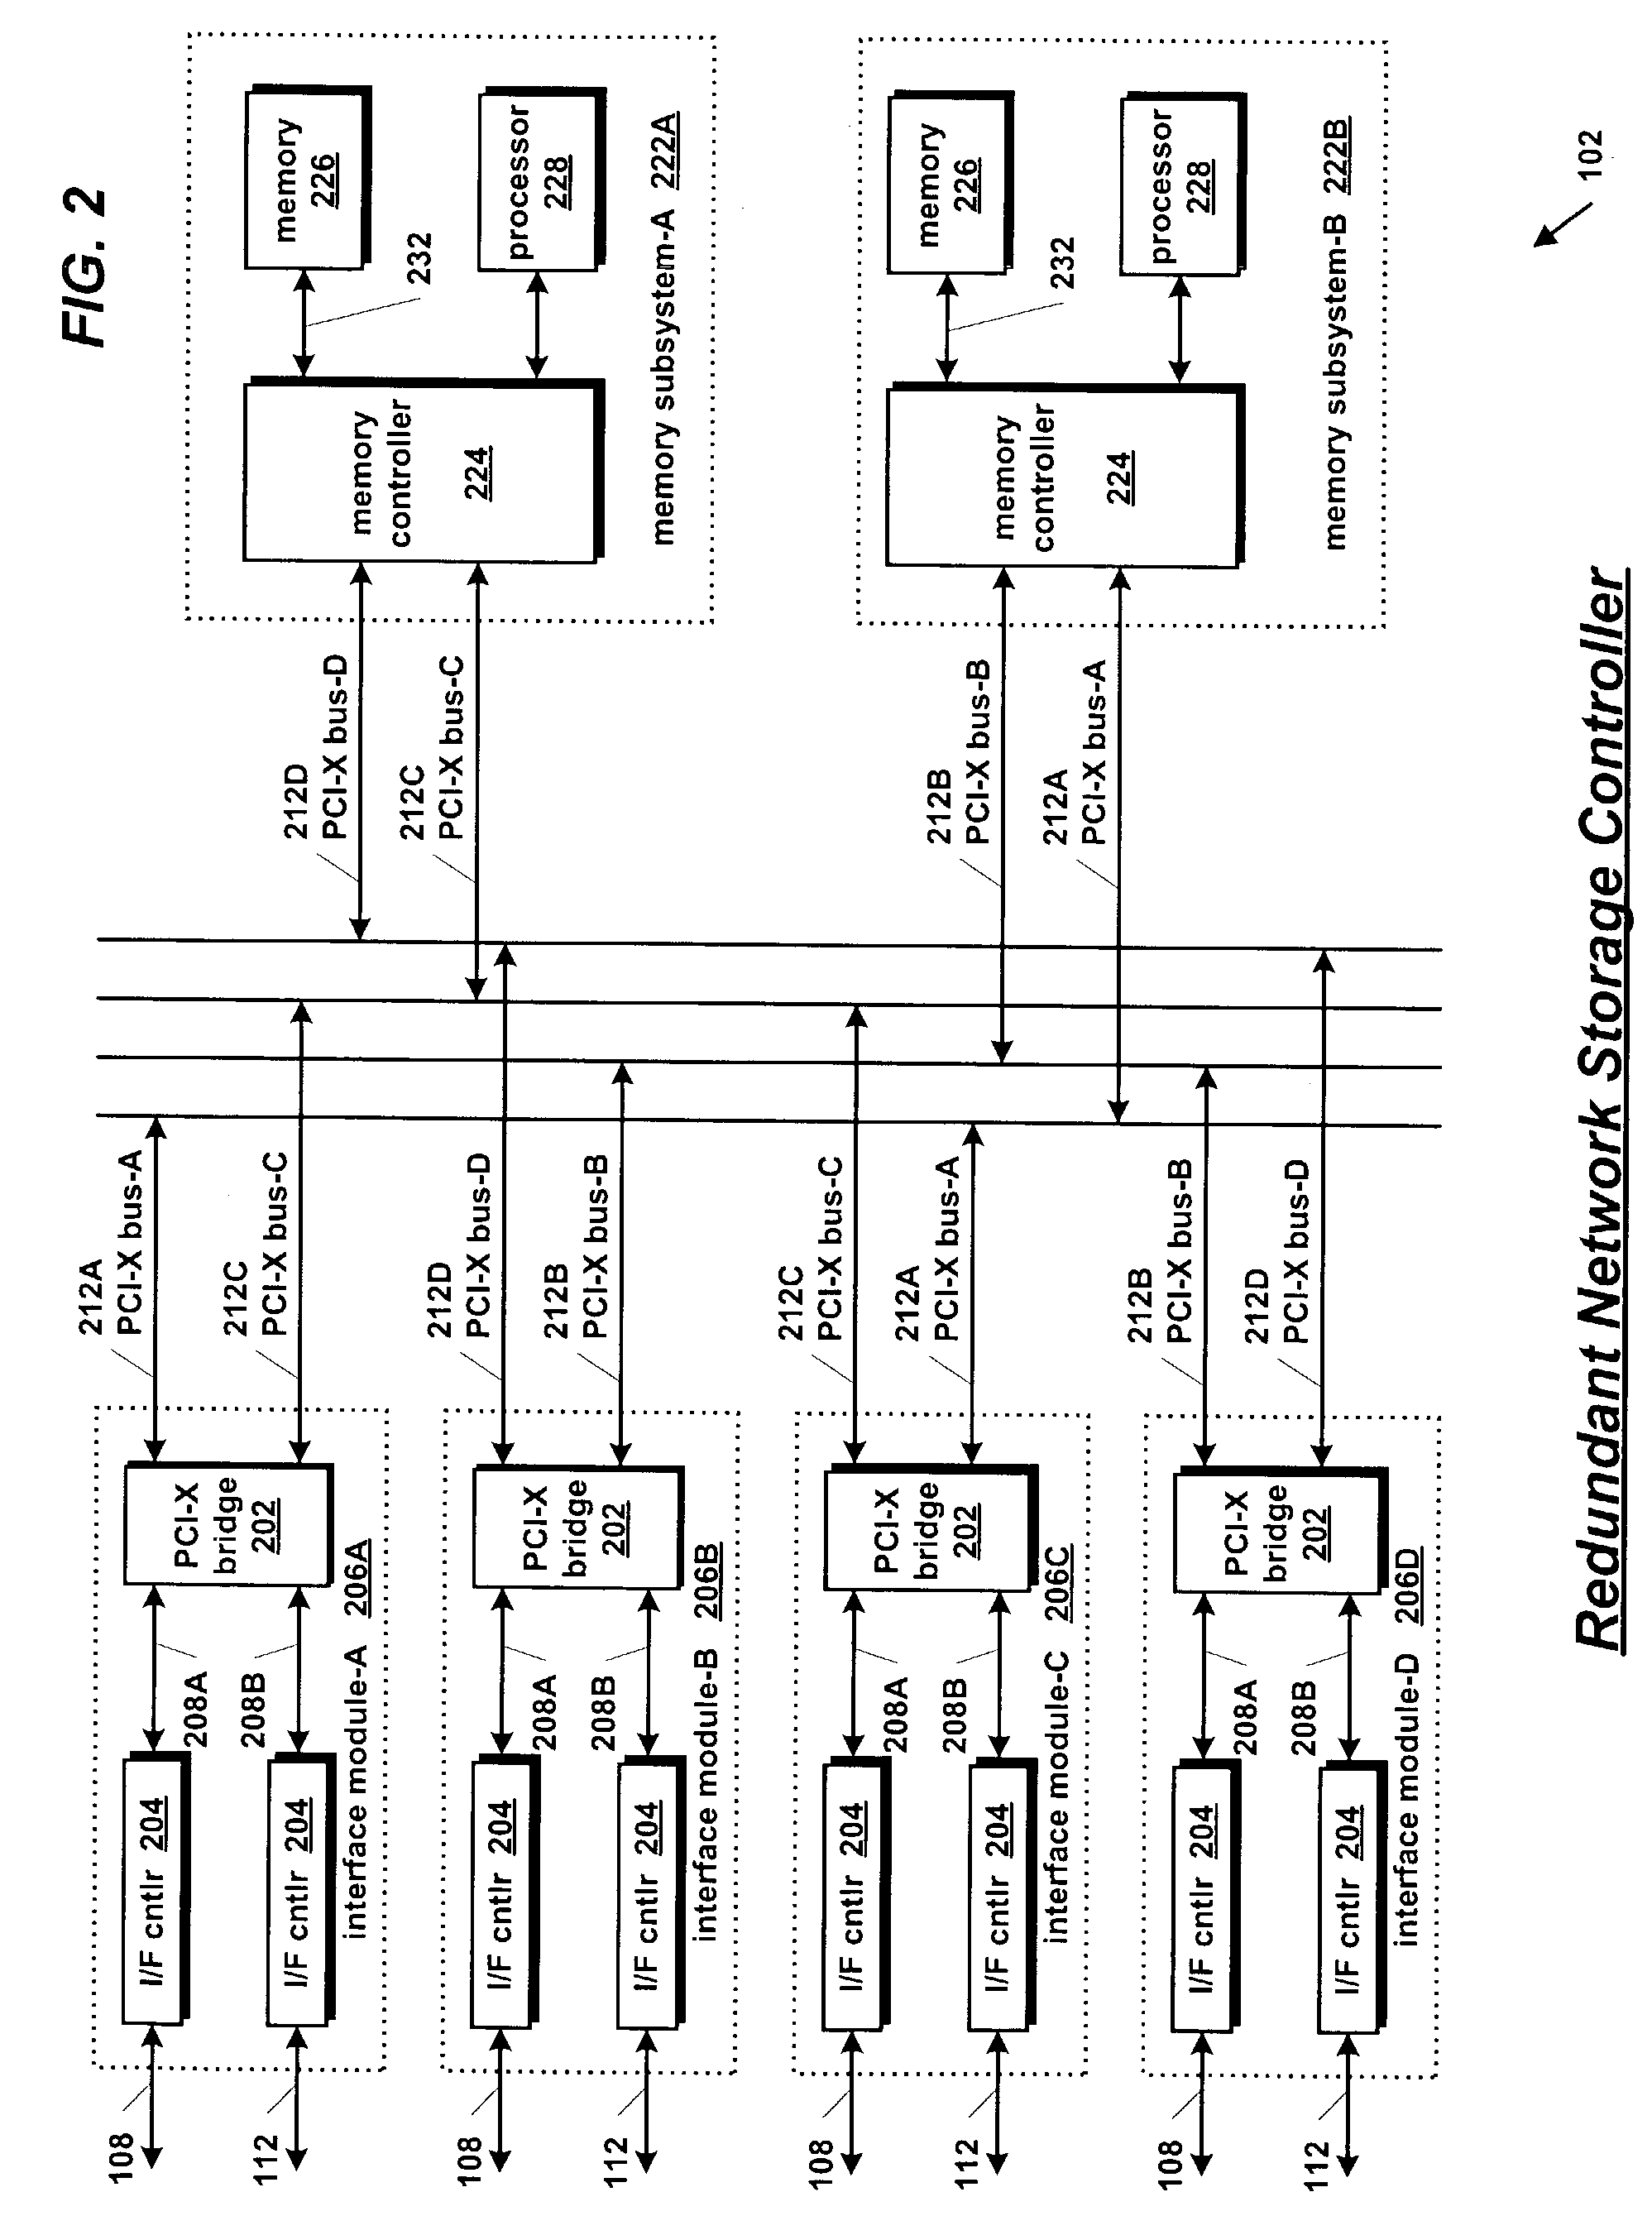 Broadcast bridge apparatus for transferring data to redundant memory subsystems in a storage controller